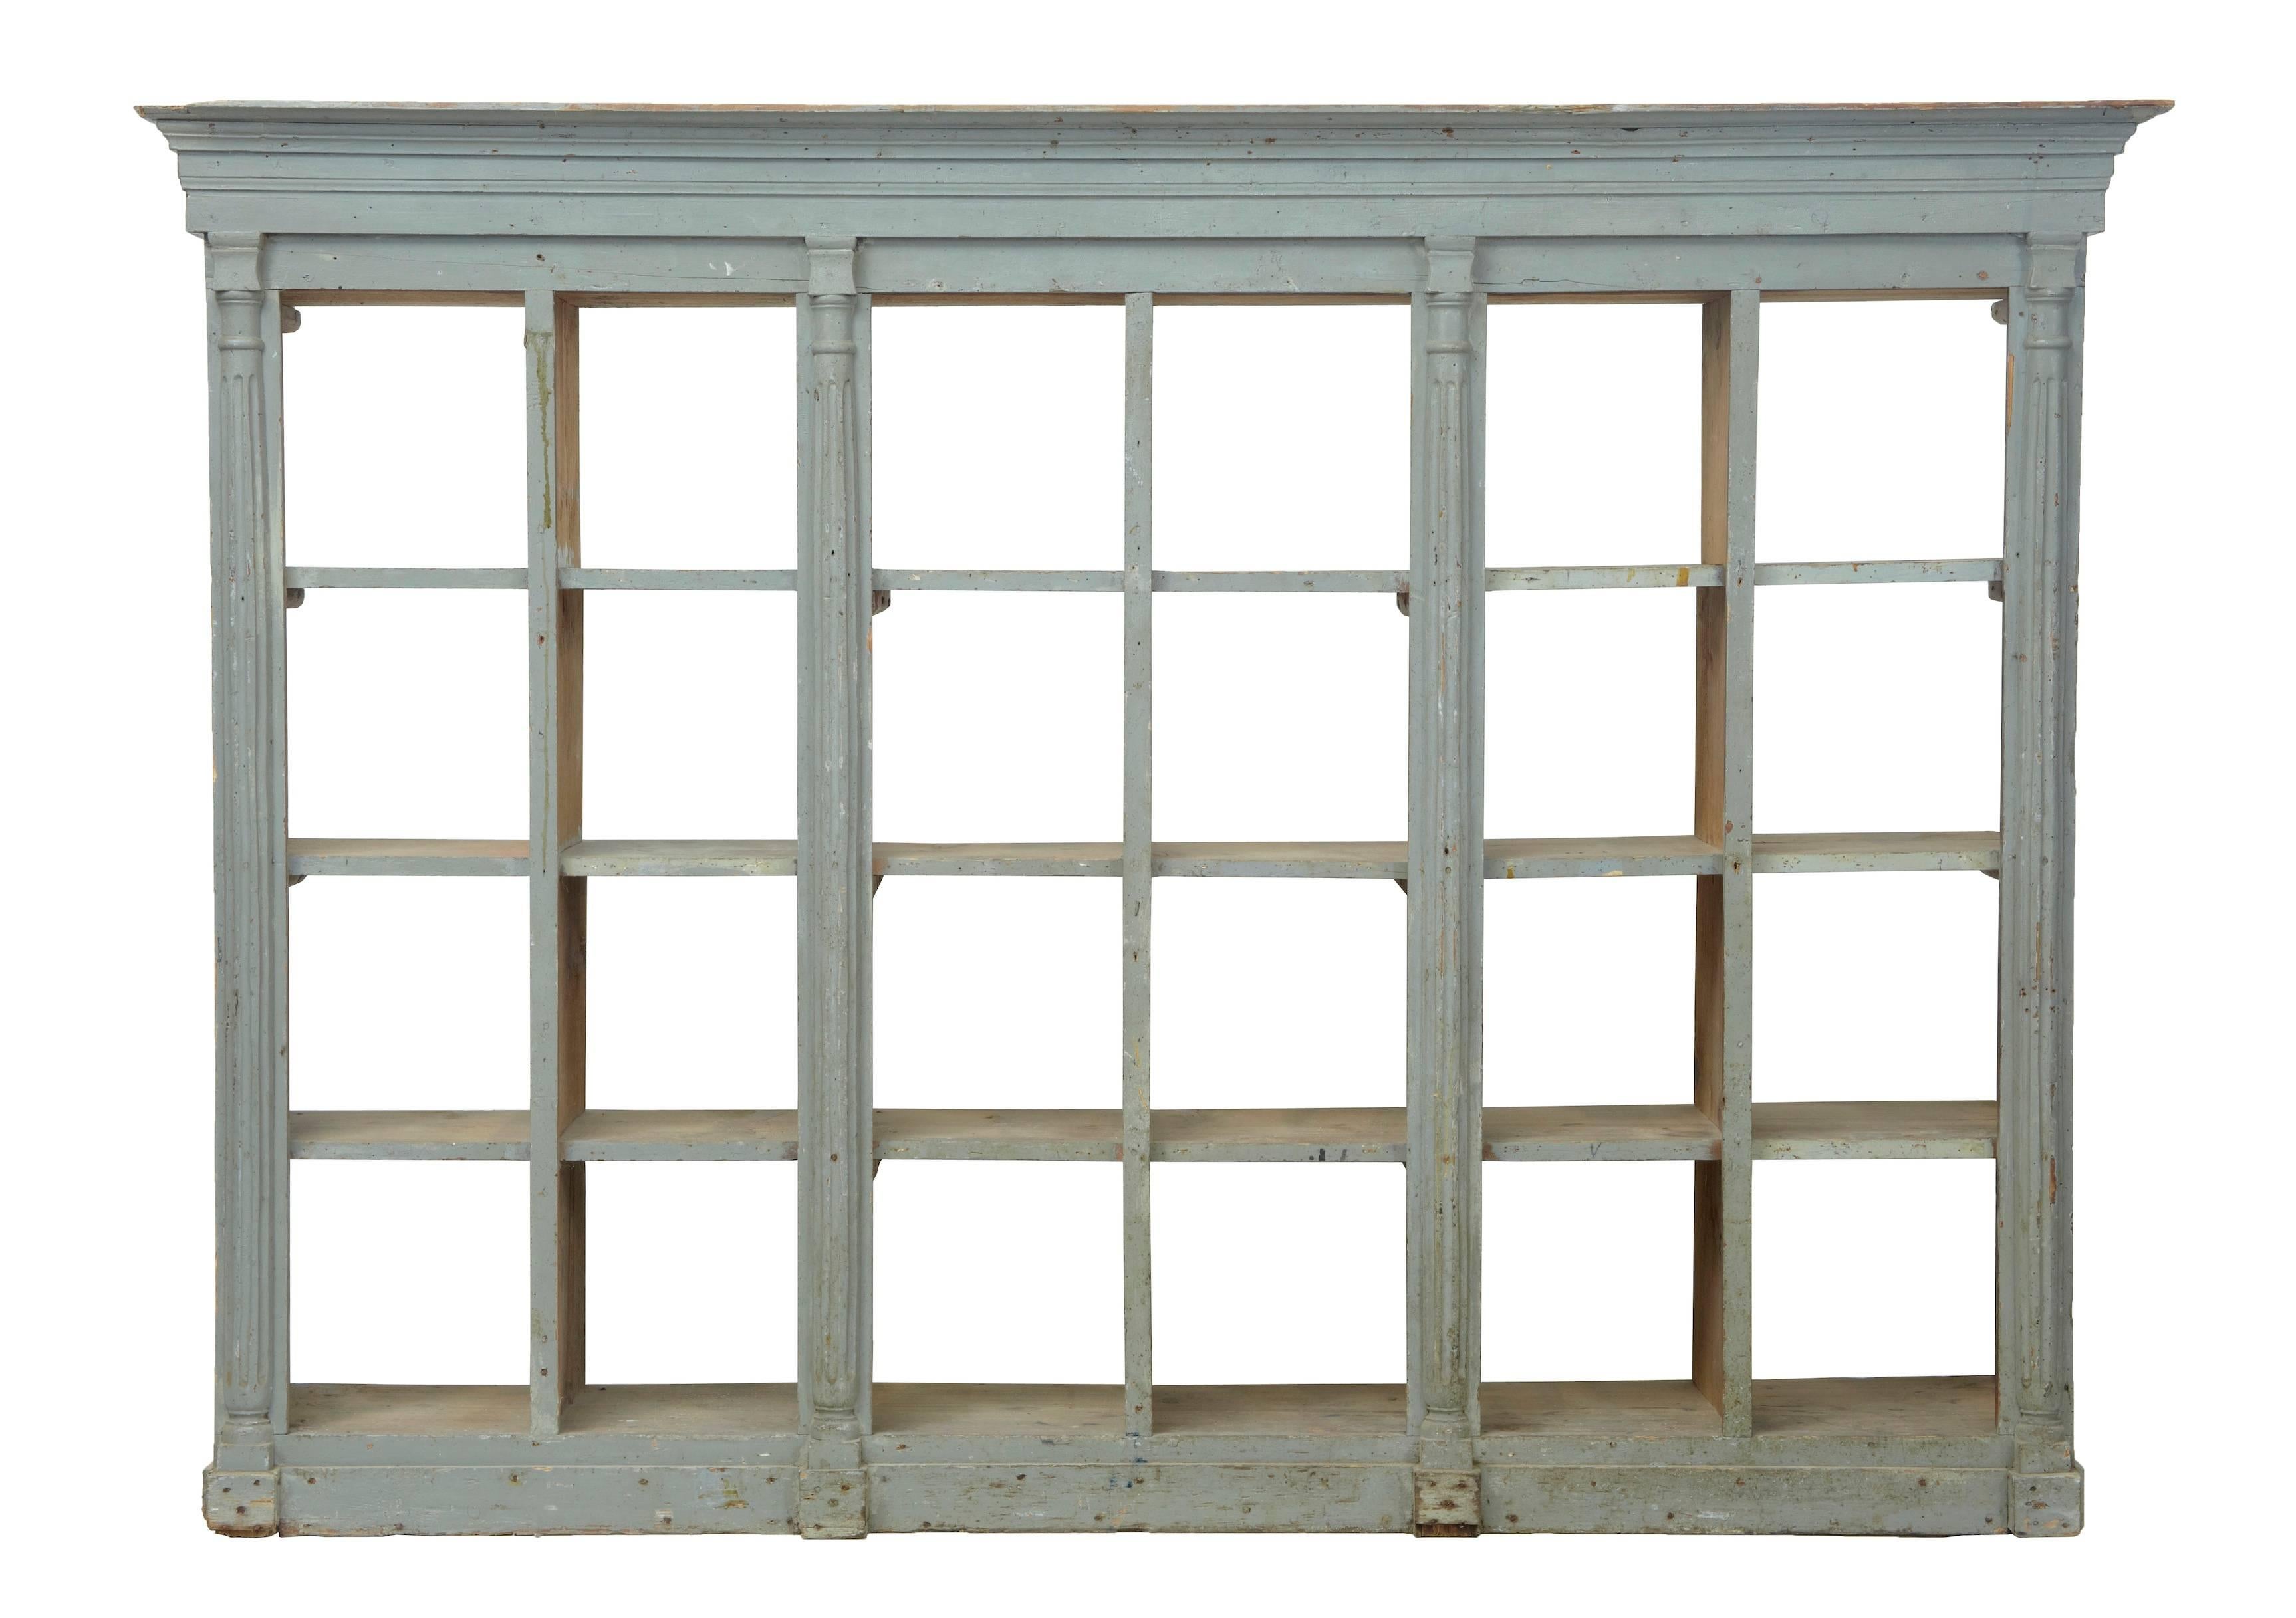 Unusual Swedish painted pine shelving unit, circa 1880.
Lends itself perfectly to a shop display or a interesting installation for the home.
Features shaped cornice and columns in between each section.
24 equal size compartments.
Later